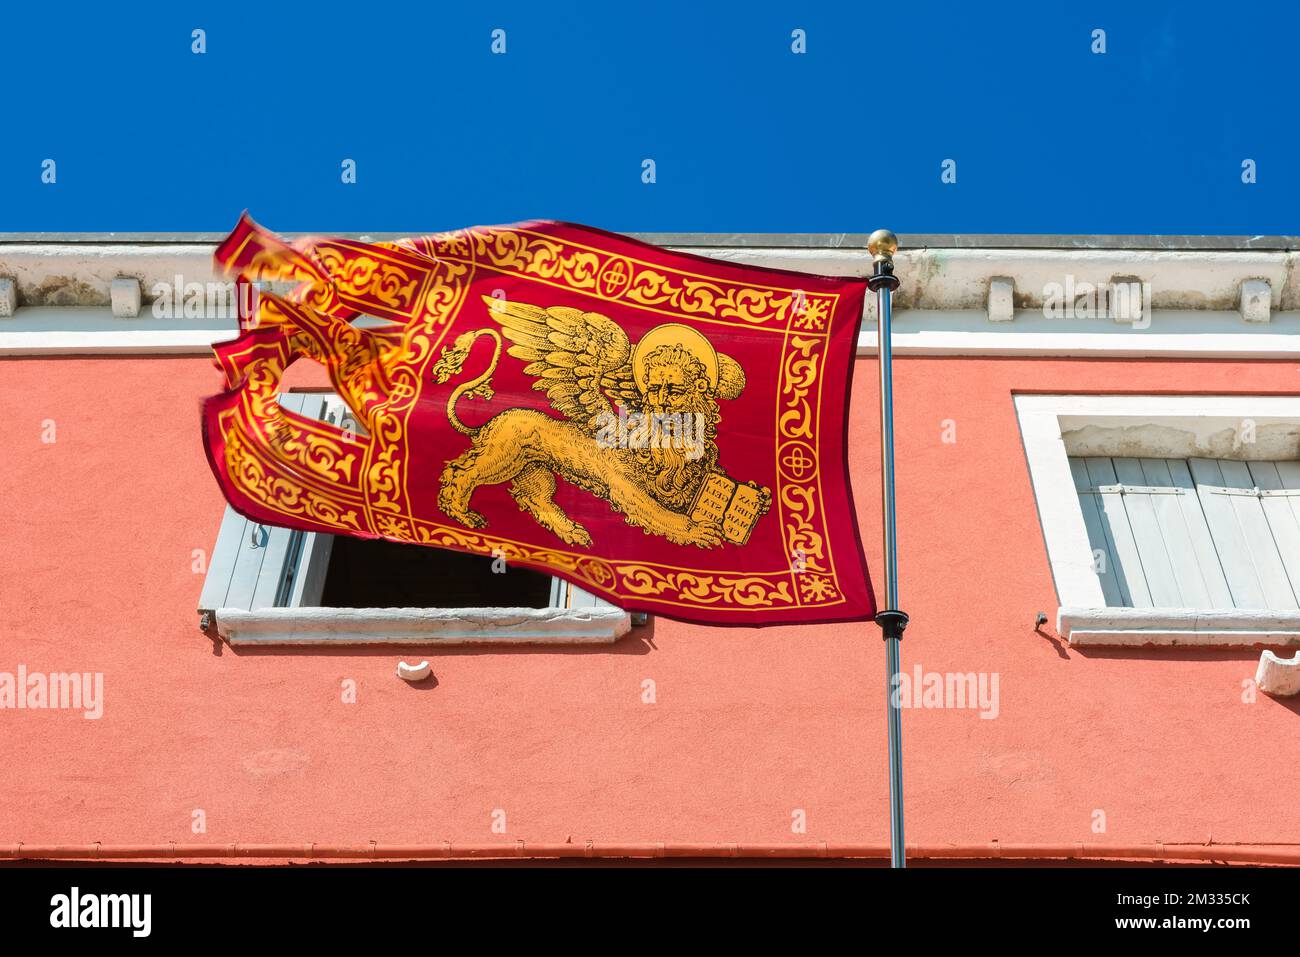 Venice lion flag, view of a flag of the Lion of Saint Mark - emblem of the city and Comune of Venice - in a street on the Venetian island of Chioggia. Stock Photo